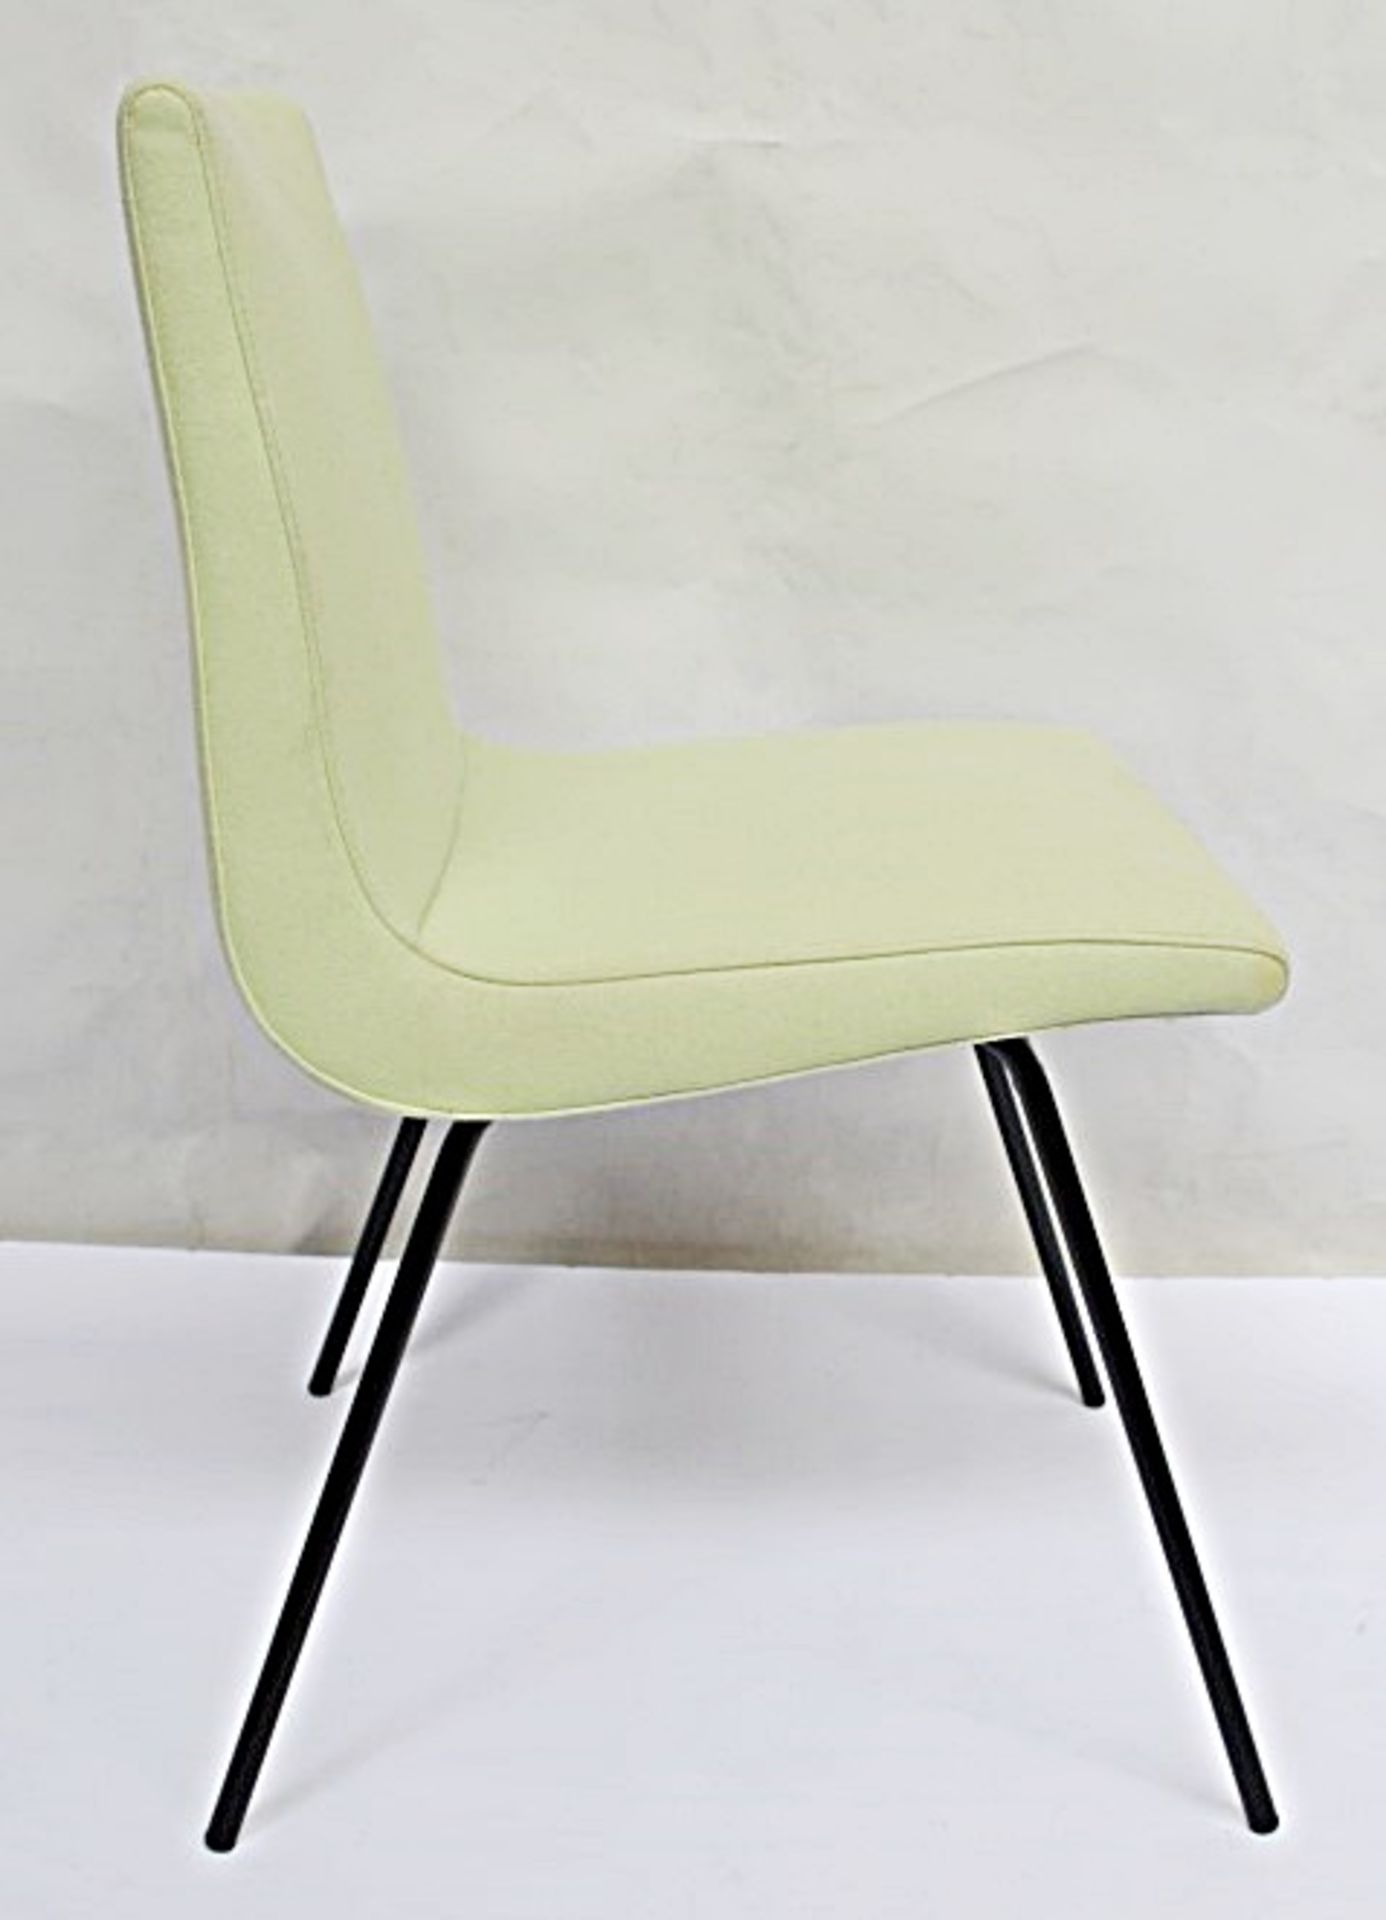 1 x LIGNE ROSET "TV" Dining Chair - Covered In Mint Green "Divina" Felt Fabric With Black - Image 3 of 7